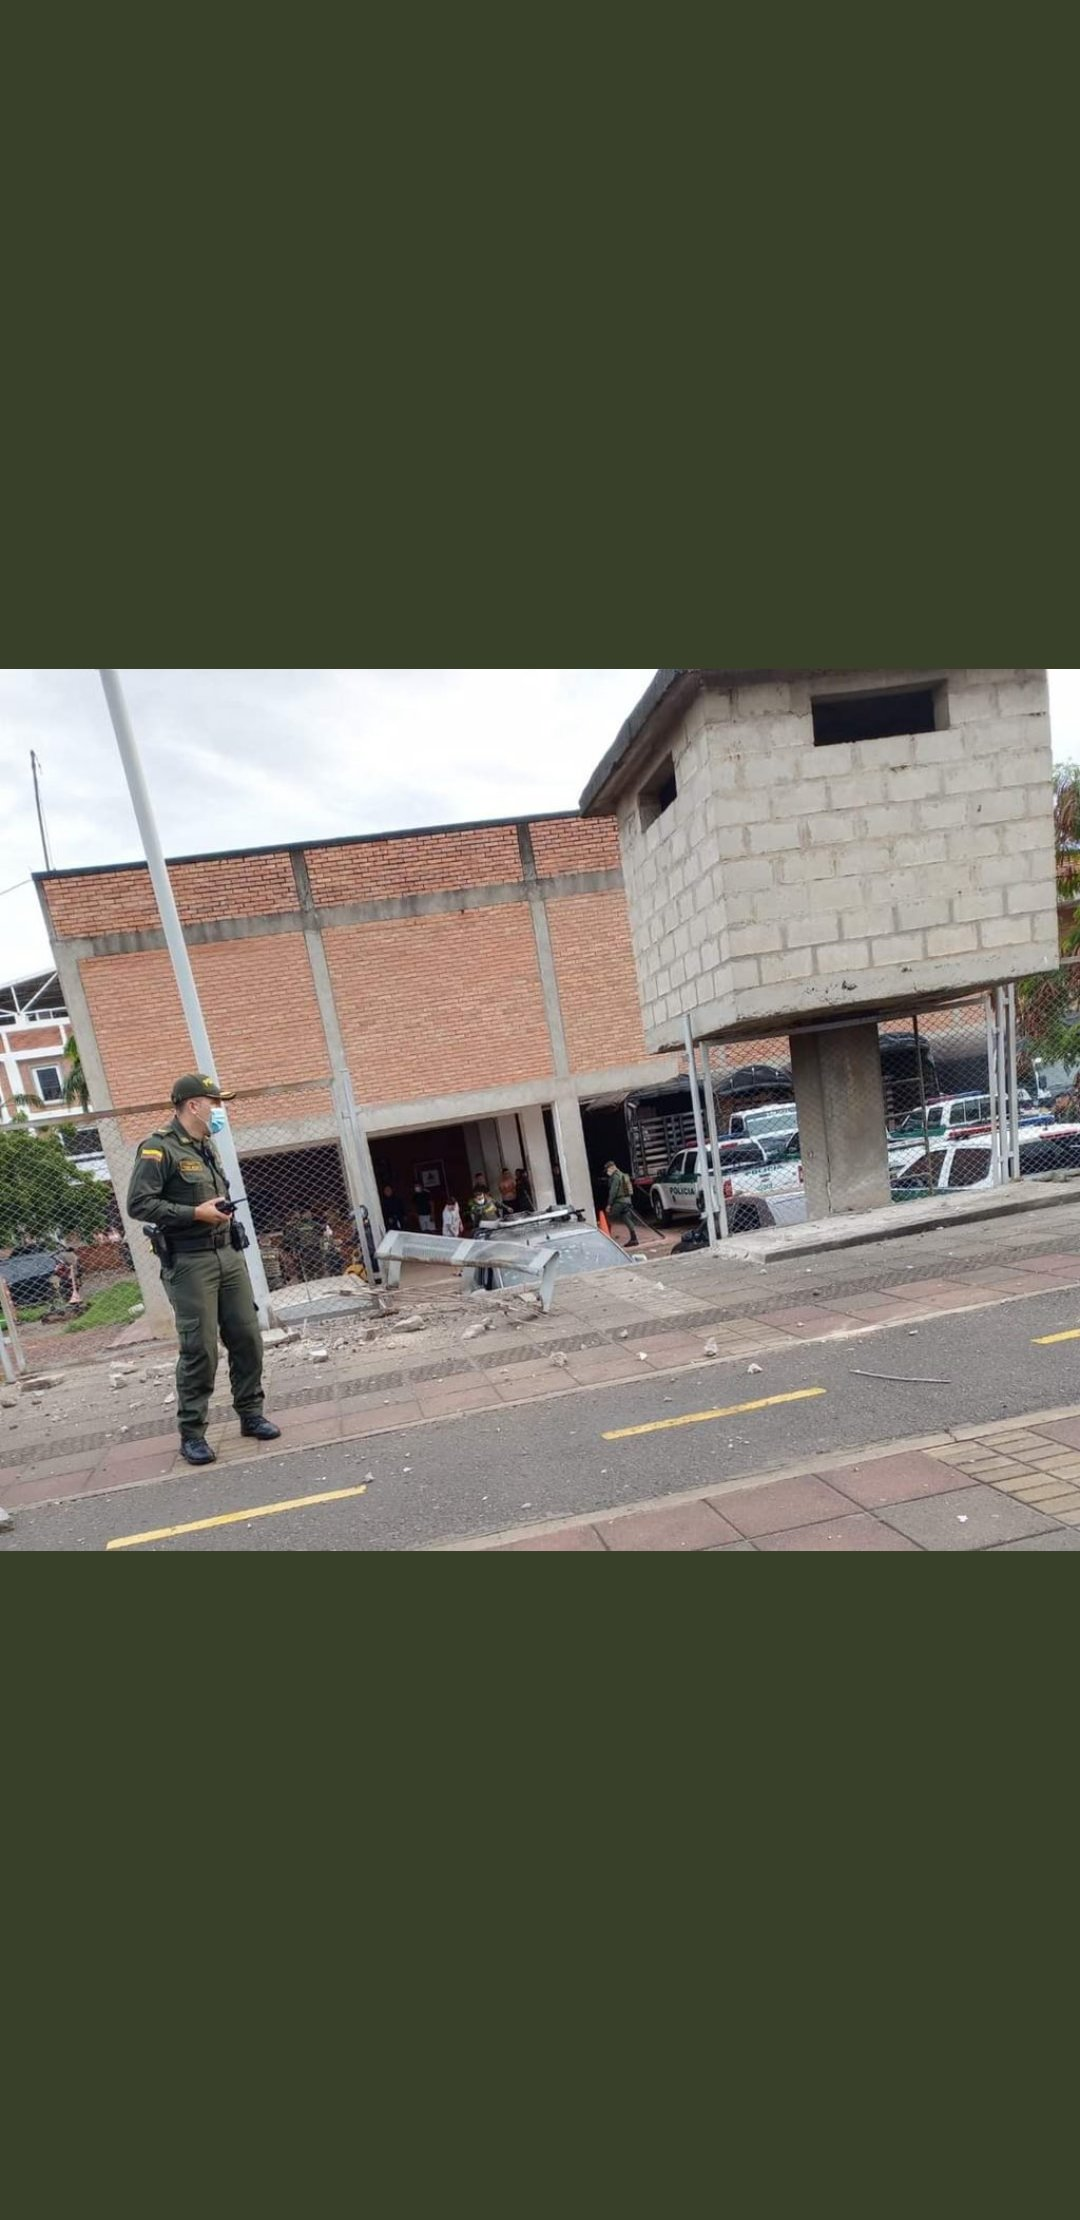 Nightmare week for security forces in Colombia: trial for arms sales and murders at the border - Politics, Crime, Murder, Colombia, Venezuela, Partisans, Terrorism, Drug fight, , Cartel, Cocaine, Fascism, Video, Longpost